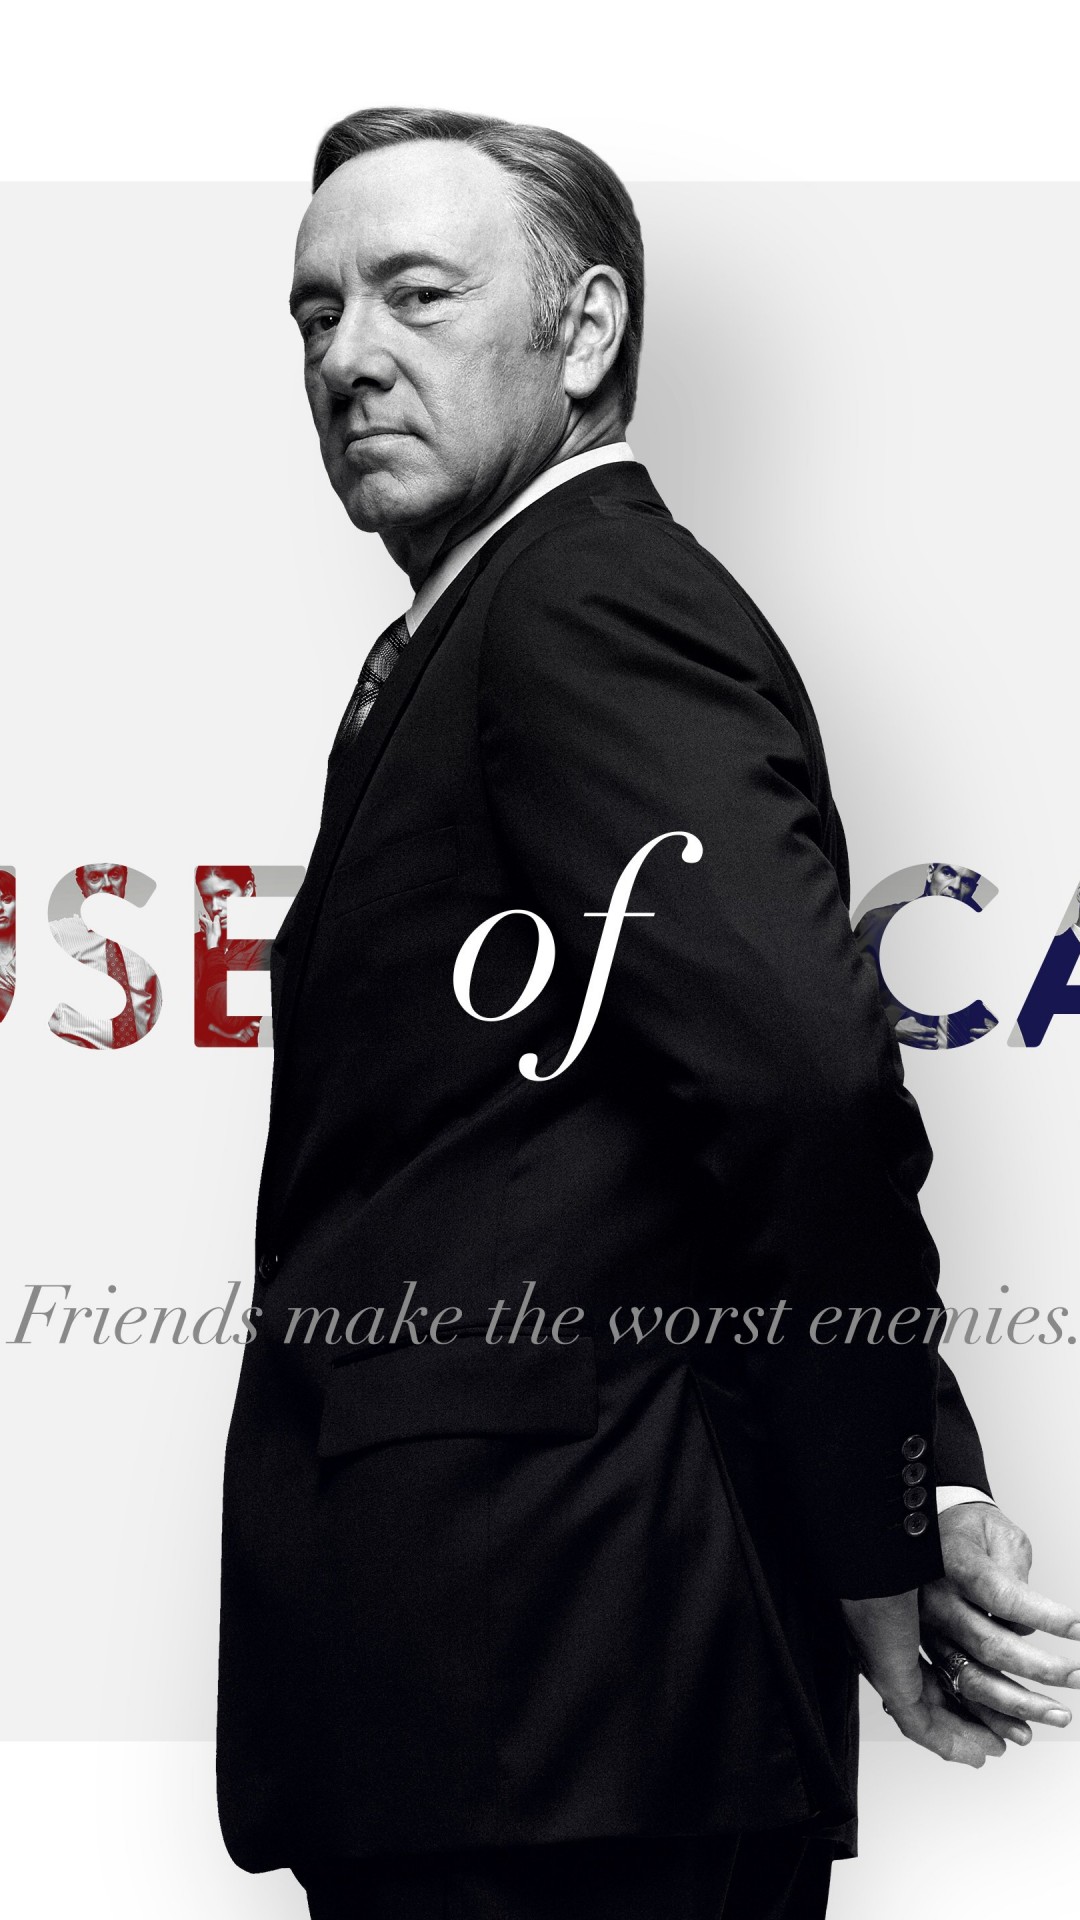 Frank Underwood - House of Cards Wallpaper for SONY Xperia Z1